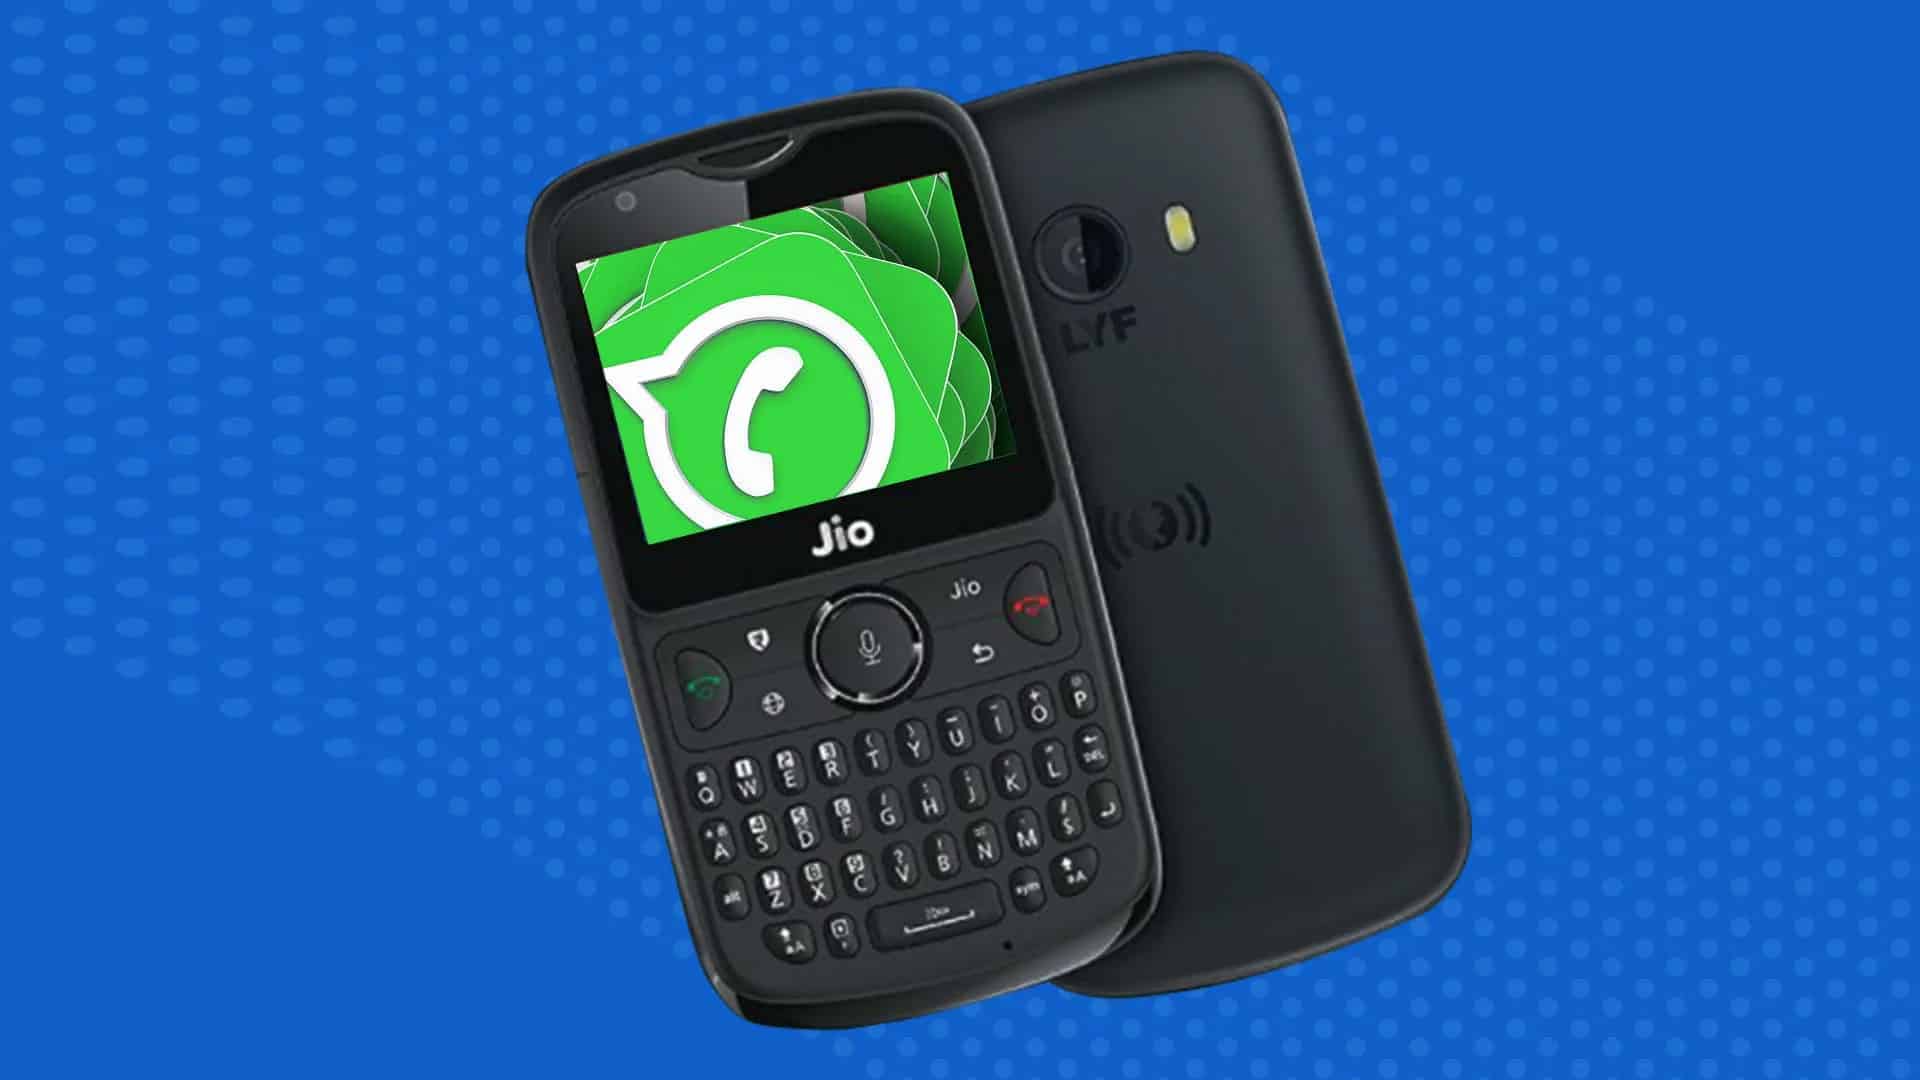 JioPhone 2 slightly expensive than available feature phone: Airtel MD